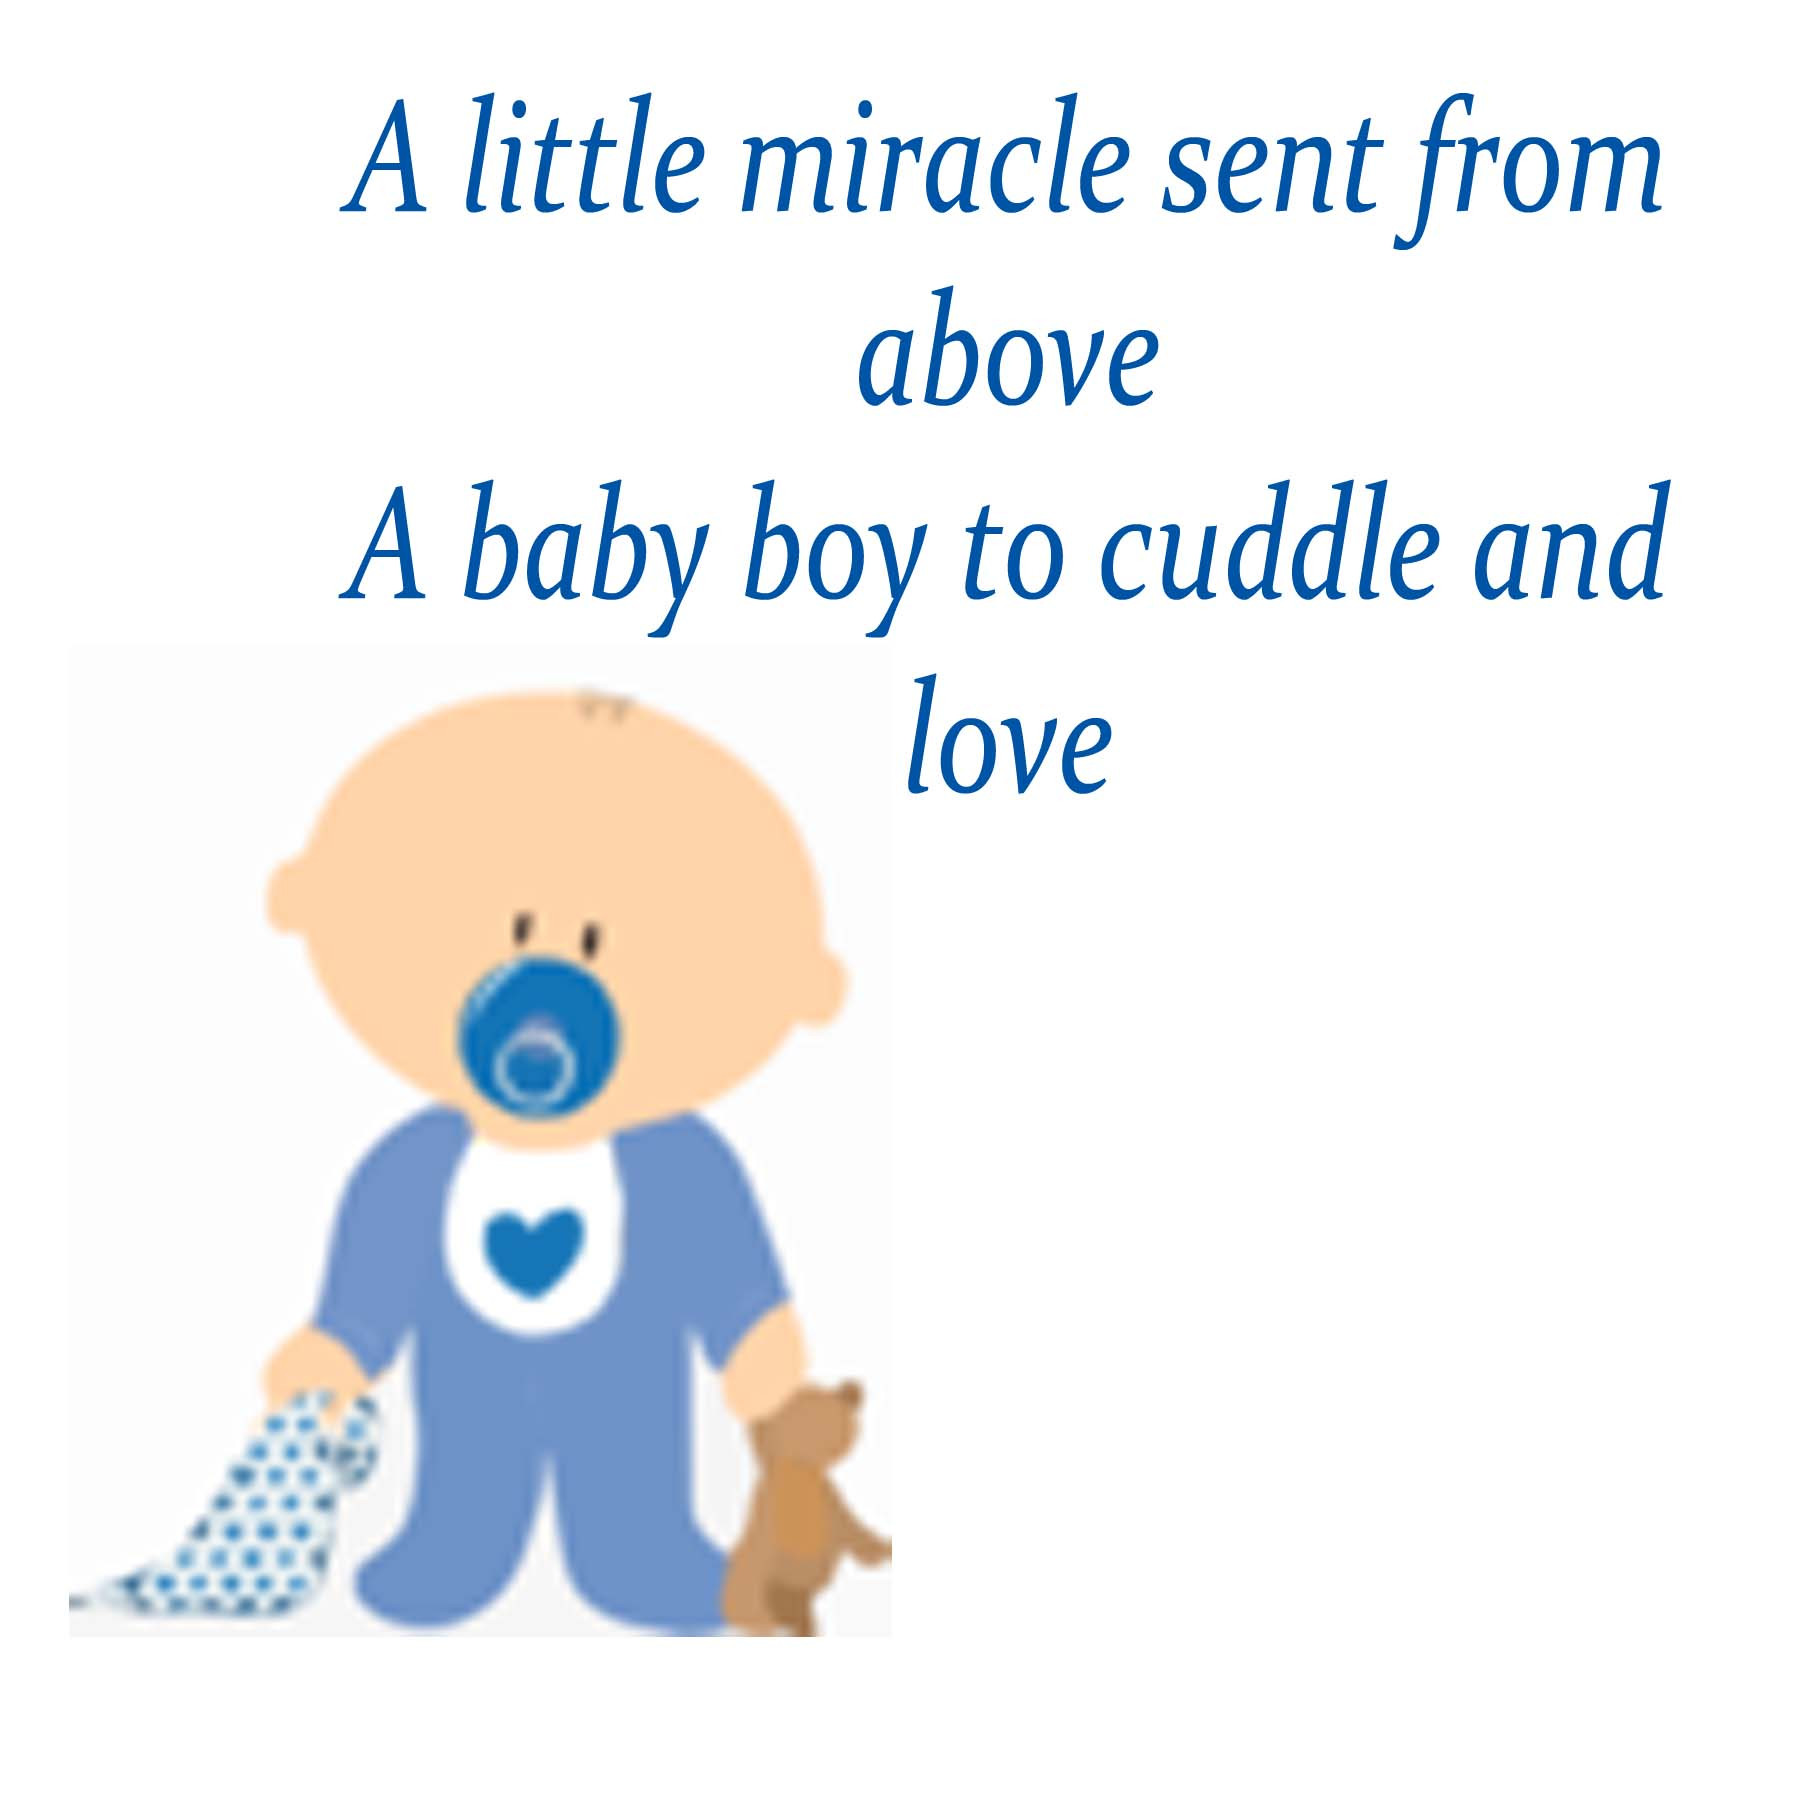 Quote About Having A Baby Boy
 Baby boy poems for baby shower